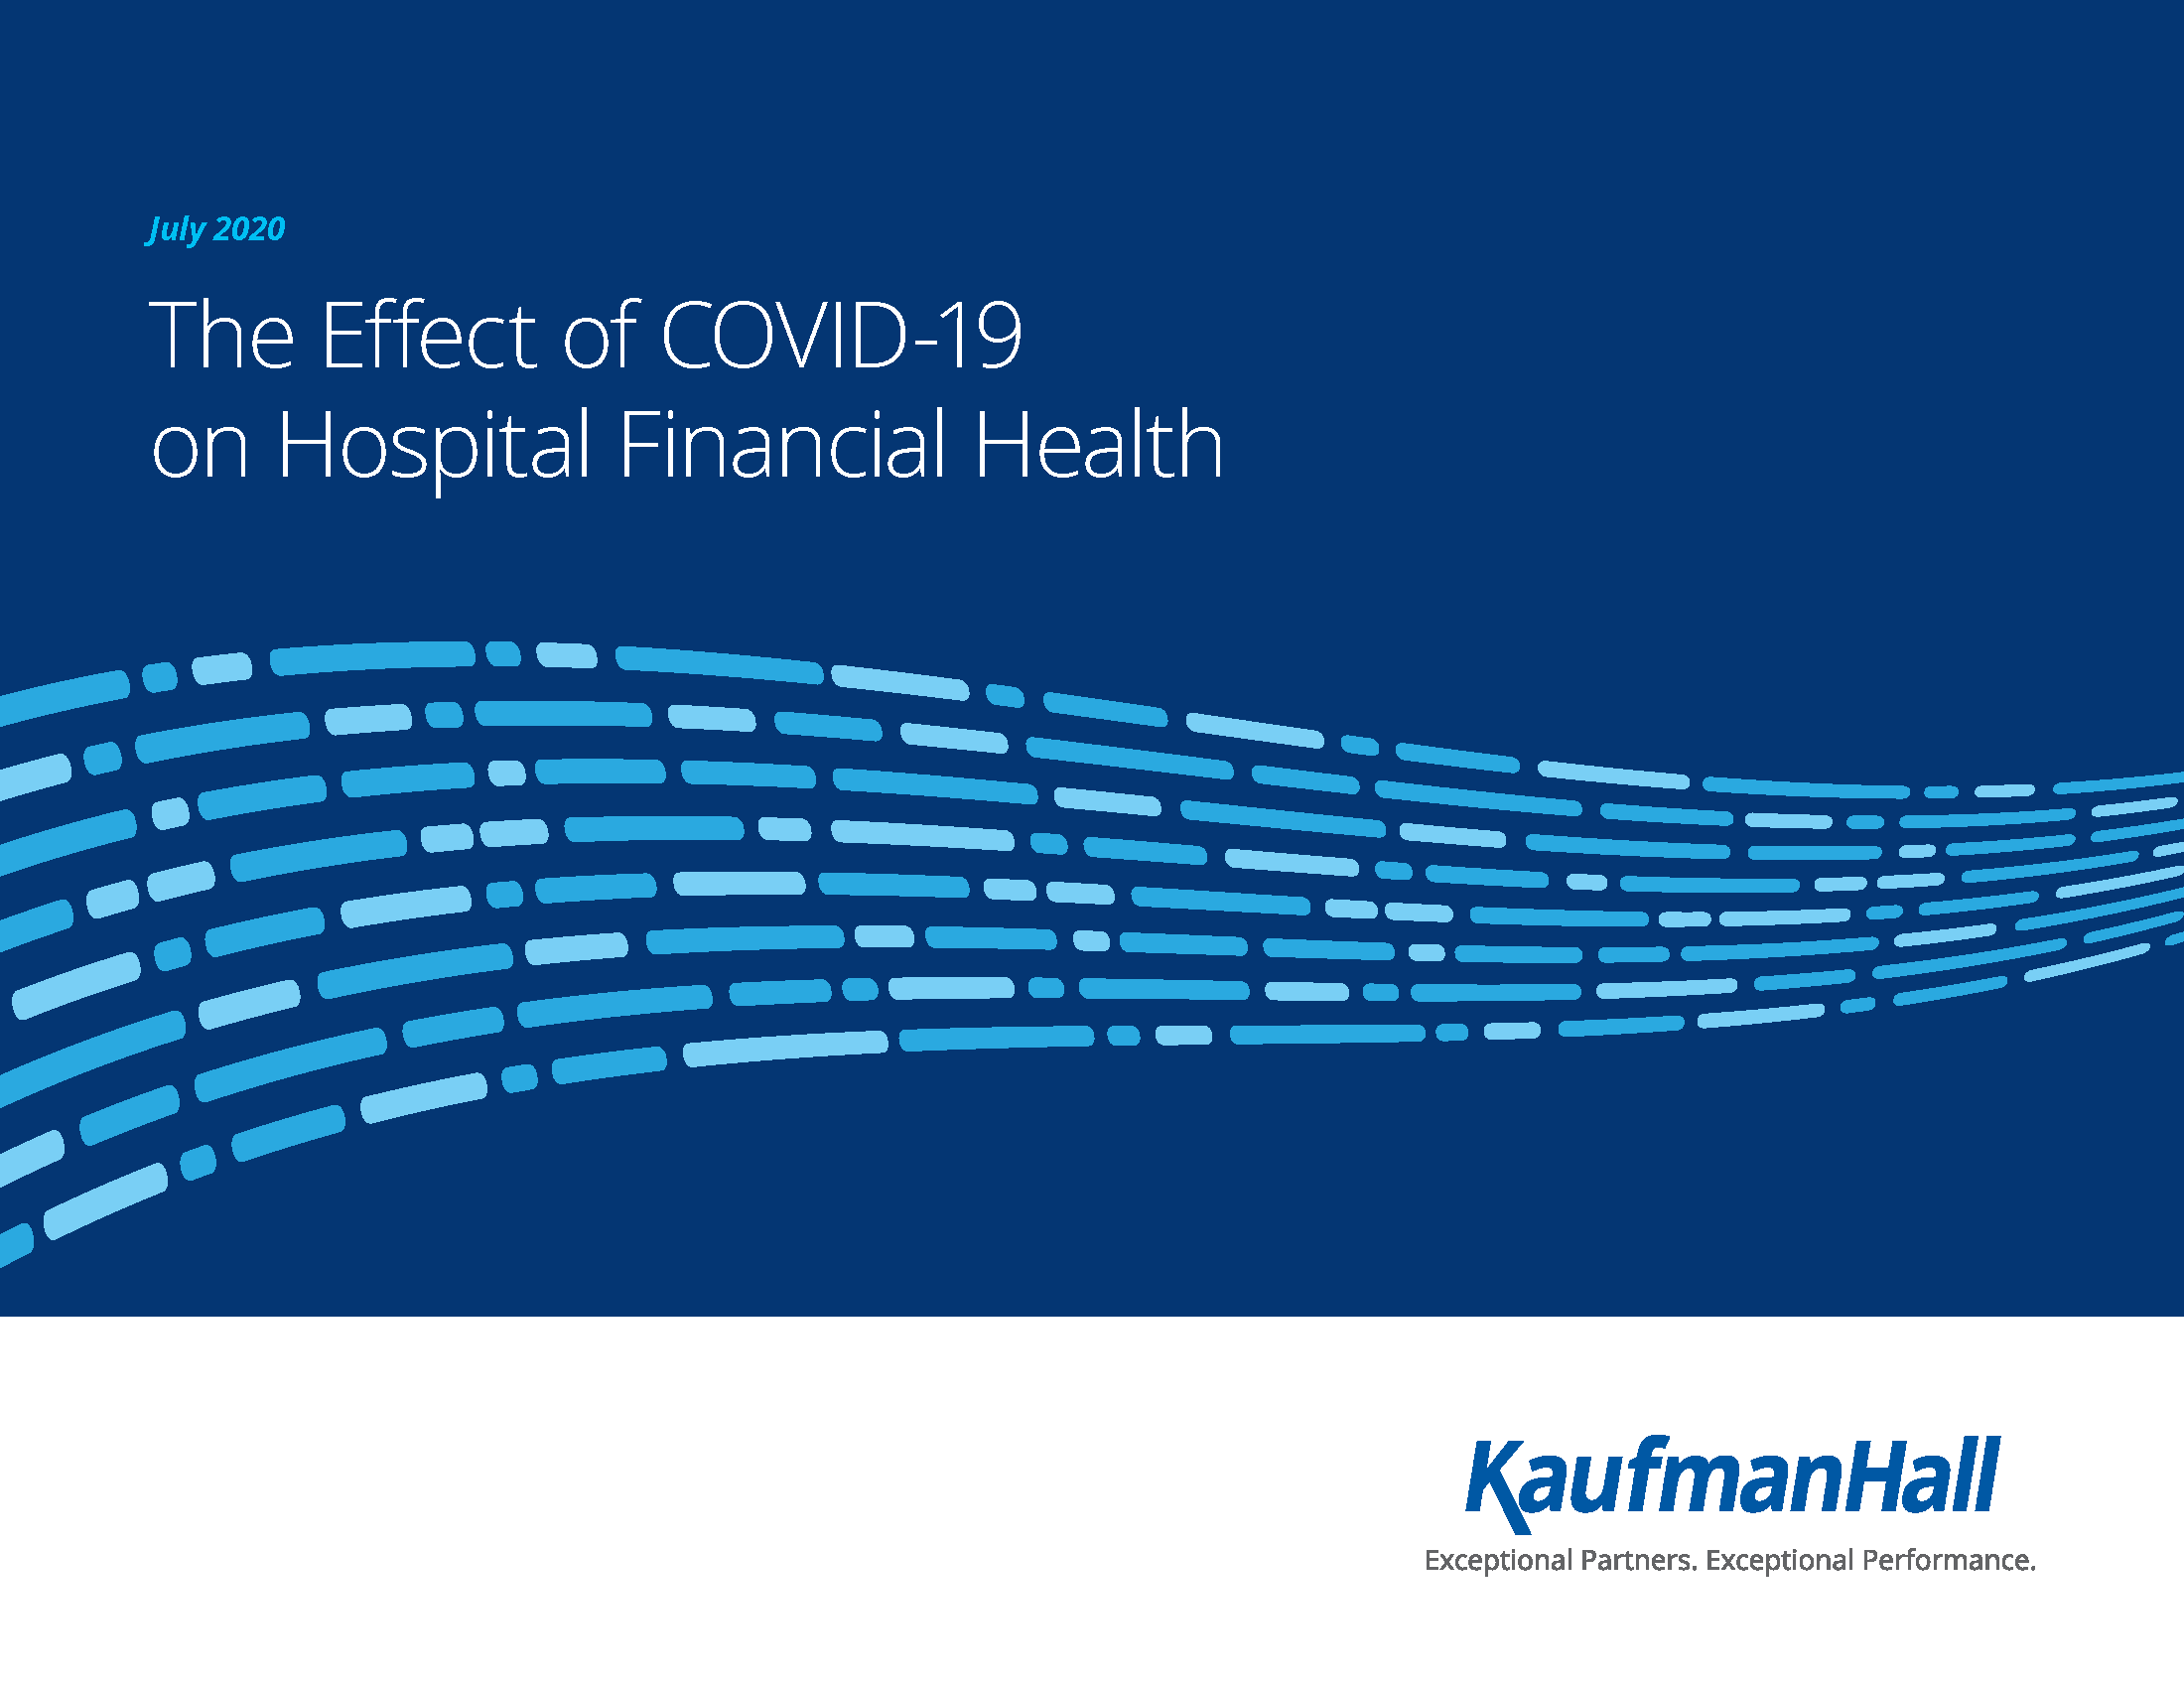 Page 1 of KaufmanHall report "The Effect of COVID-19 on Hospital Financial Health"